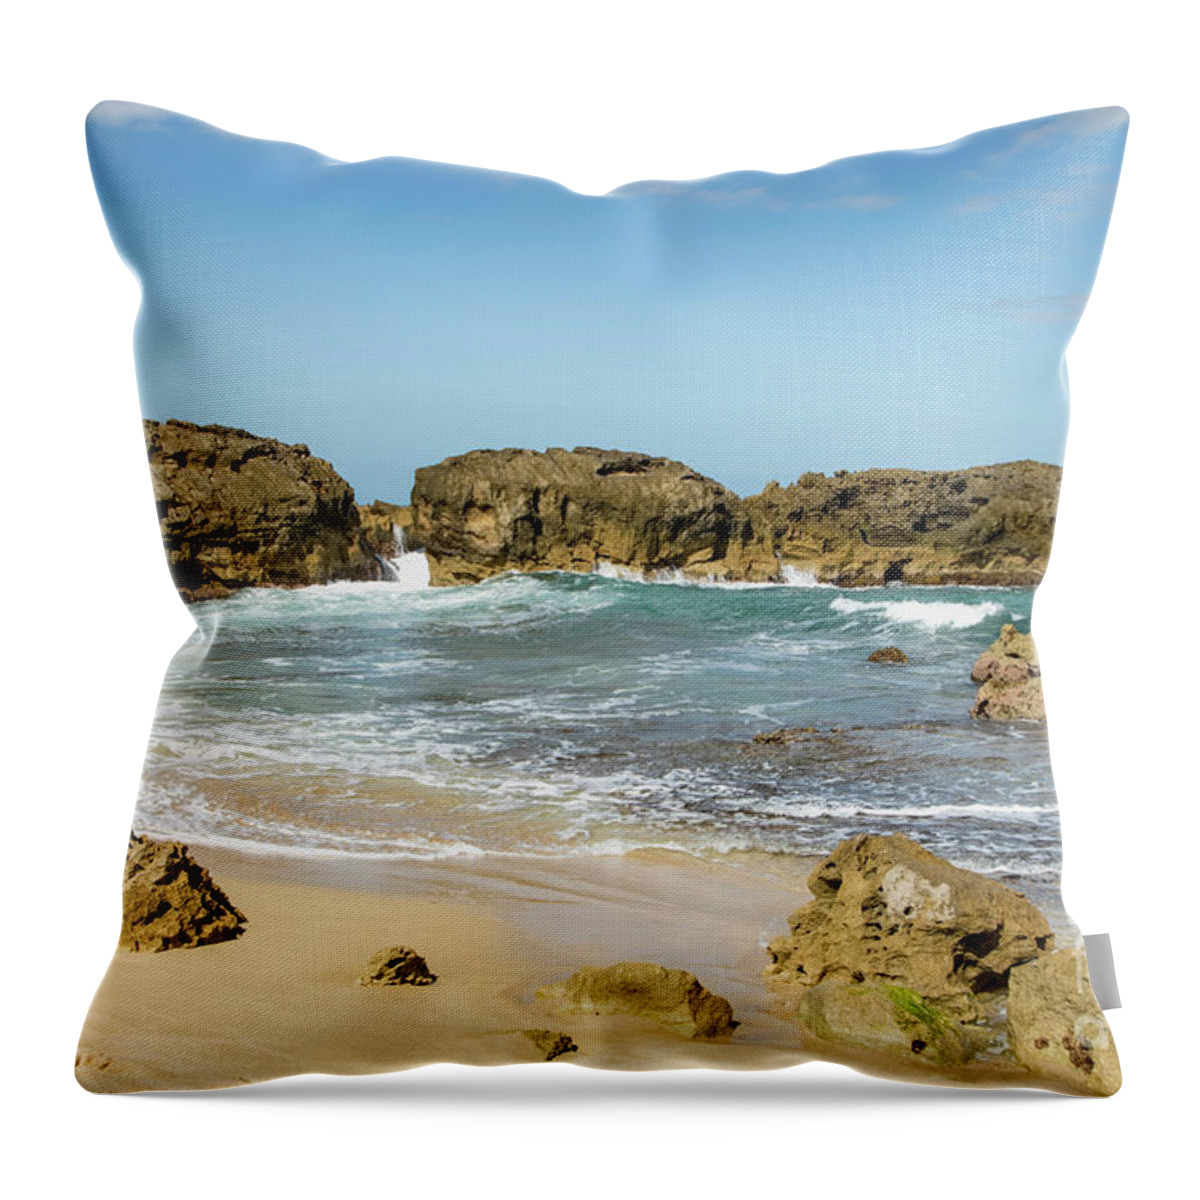 Sheltered Throw Pillow featuring the photograph Sheltered Cove on the Coast, Mar Chiquita Beach, Manati, Puerto Rico by Beachtown Views